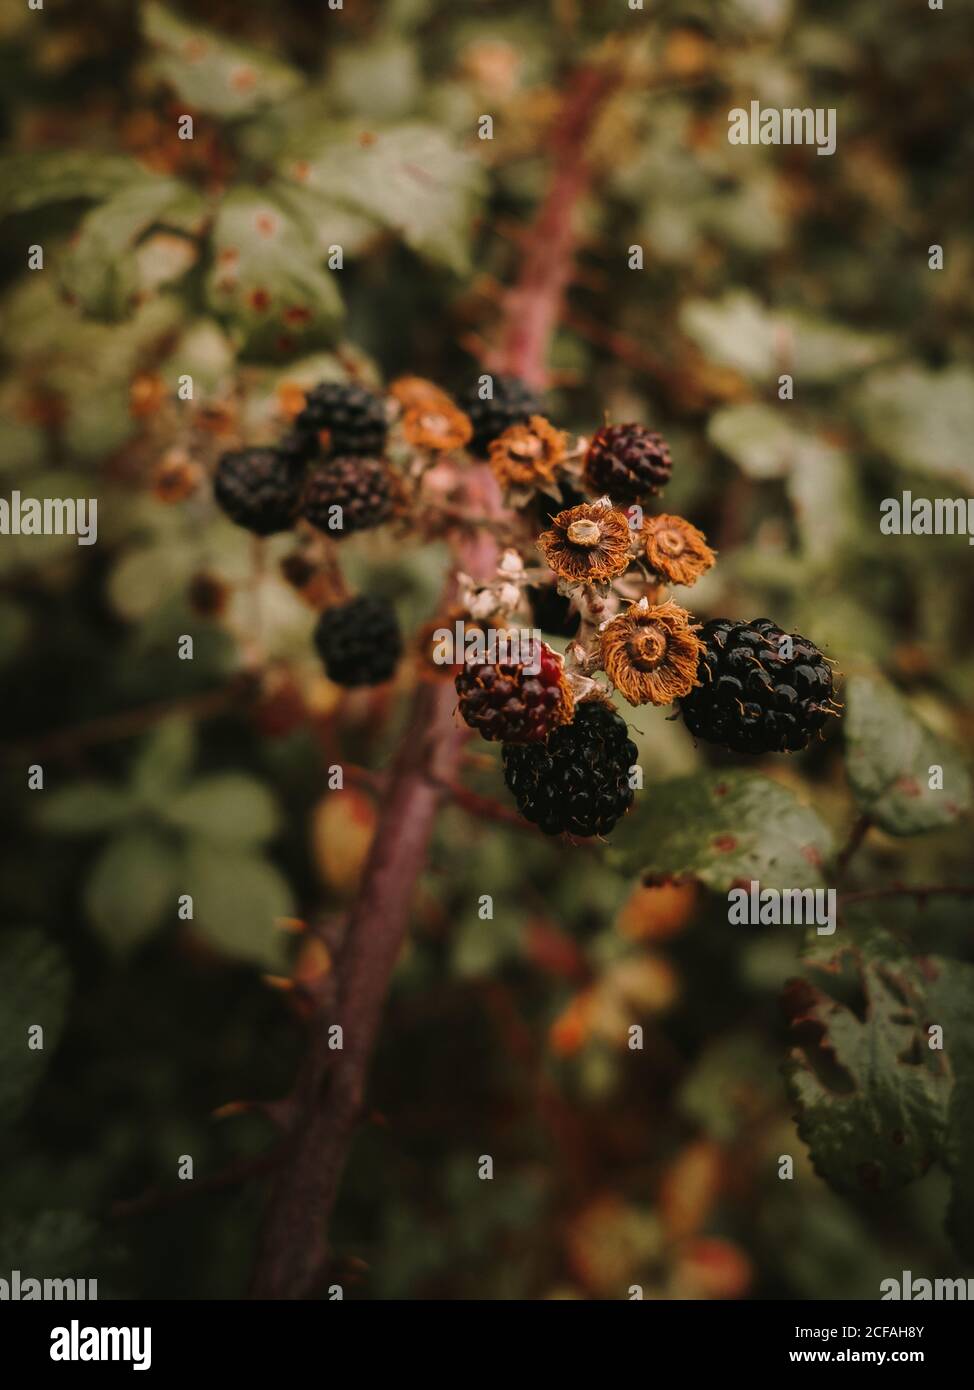 Wild fresh edible ripe and unripe blackberries with brown wilted flowers on shrub branch against blurred background of dappled green and orange leaves in autumn Stock Photo